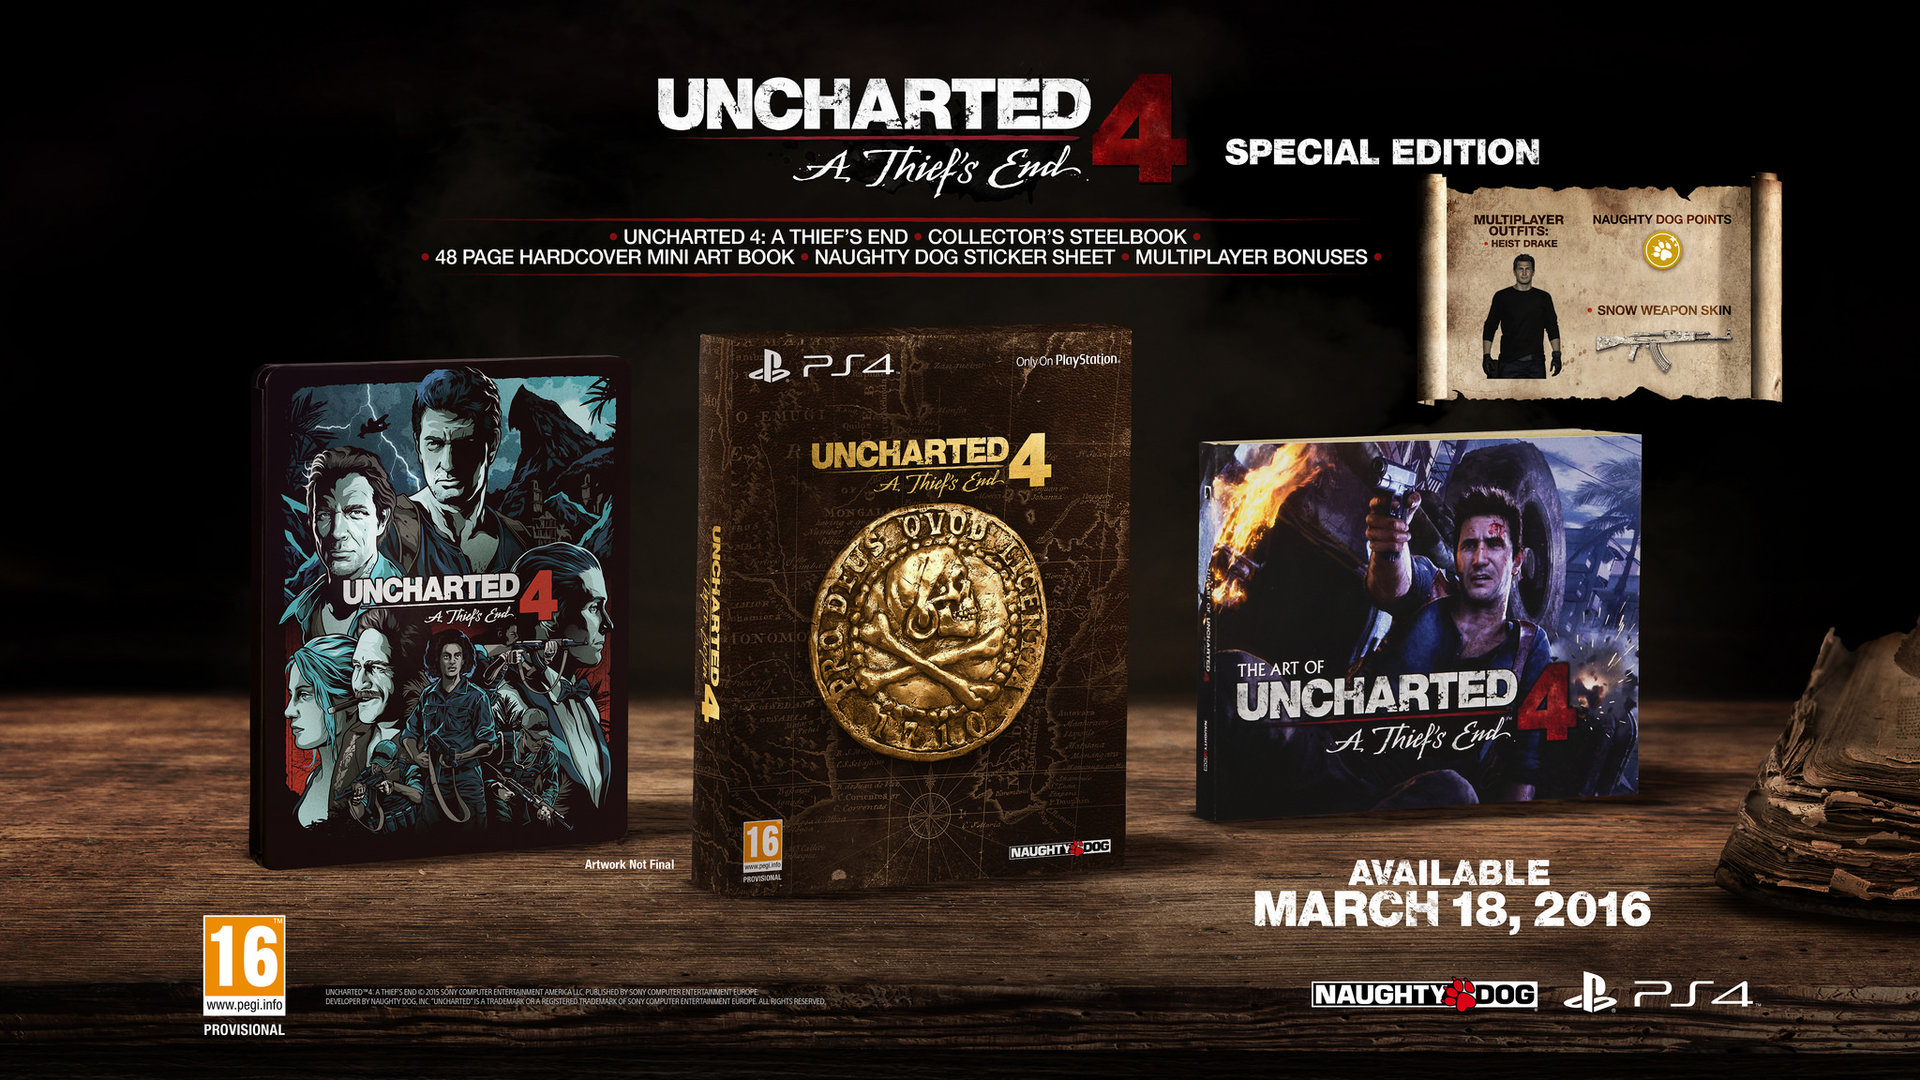 Uncharted 4: A Thief's End – Special Edition